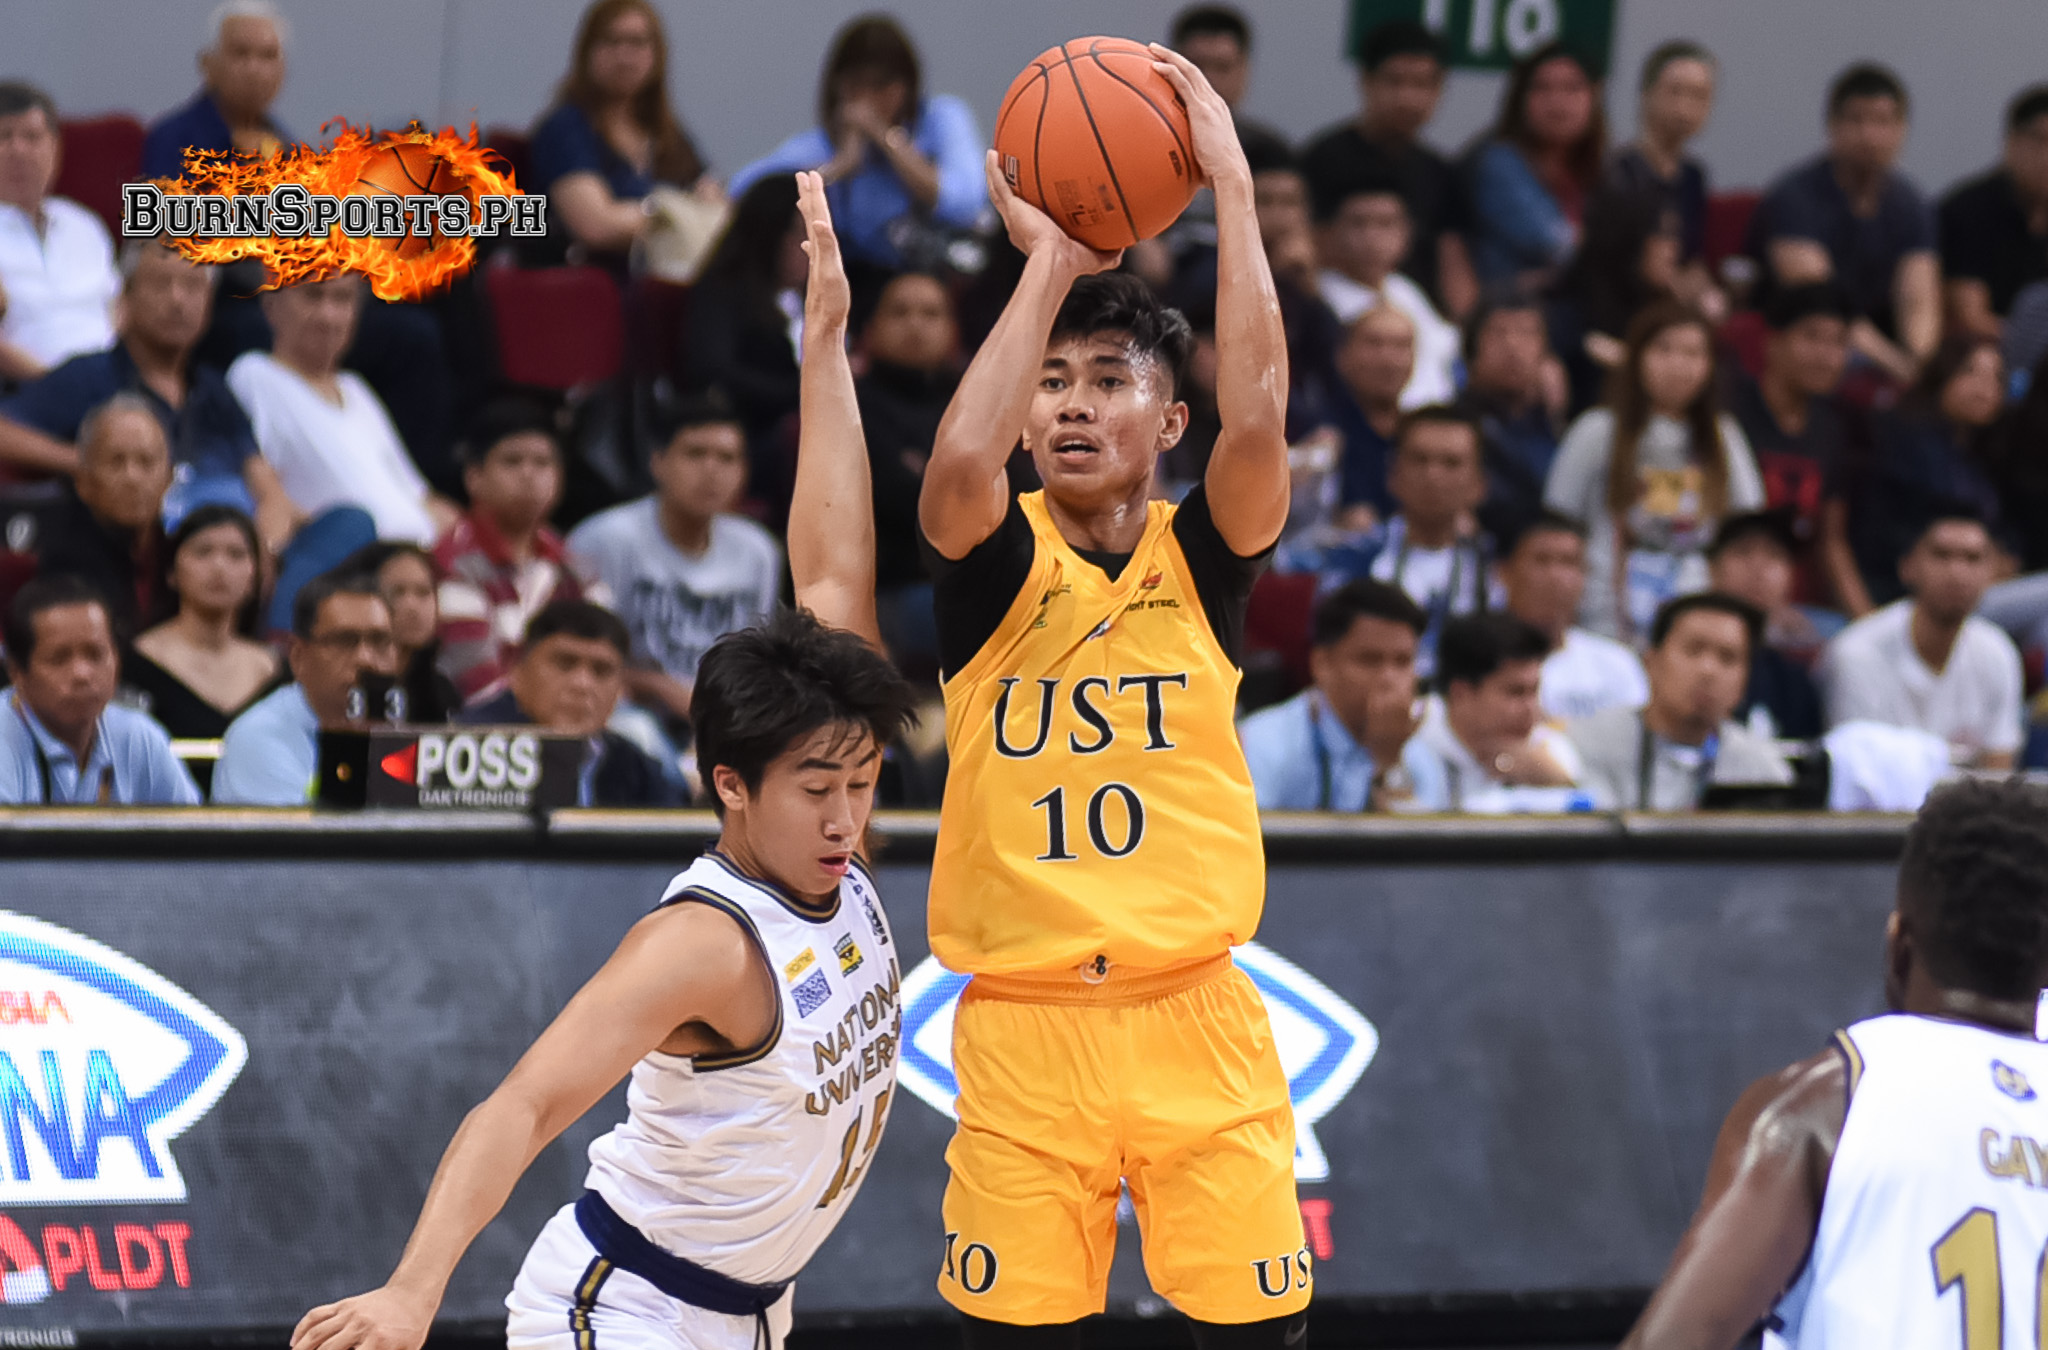 Rhenz Abando, two others also leave UST Growling Tigers